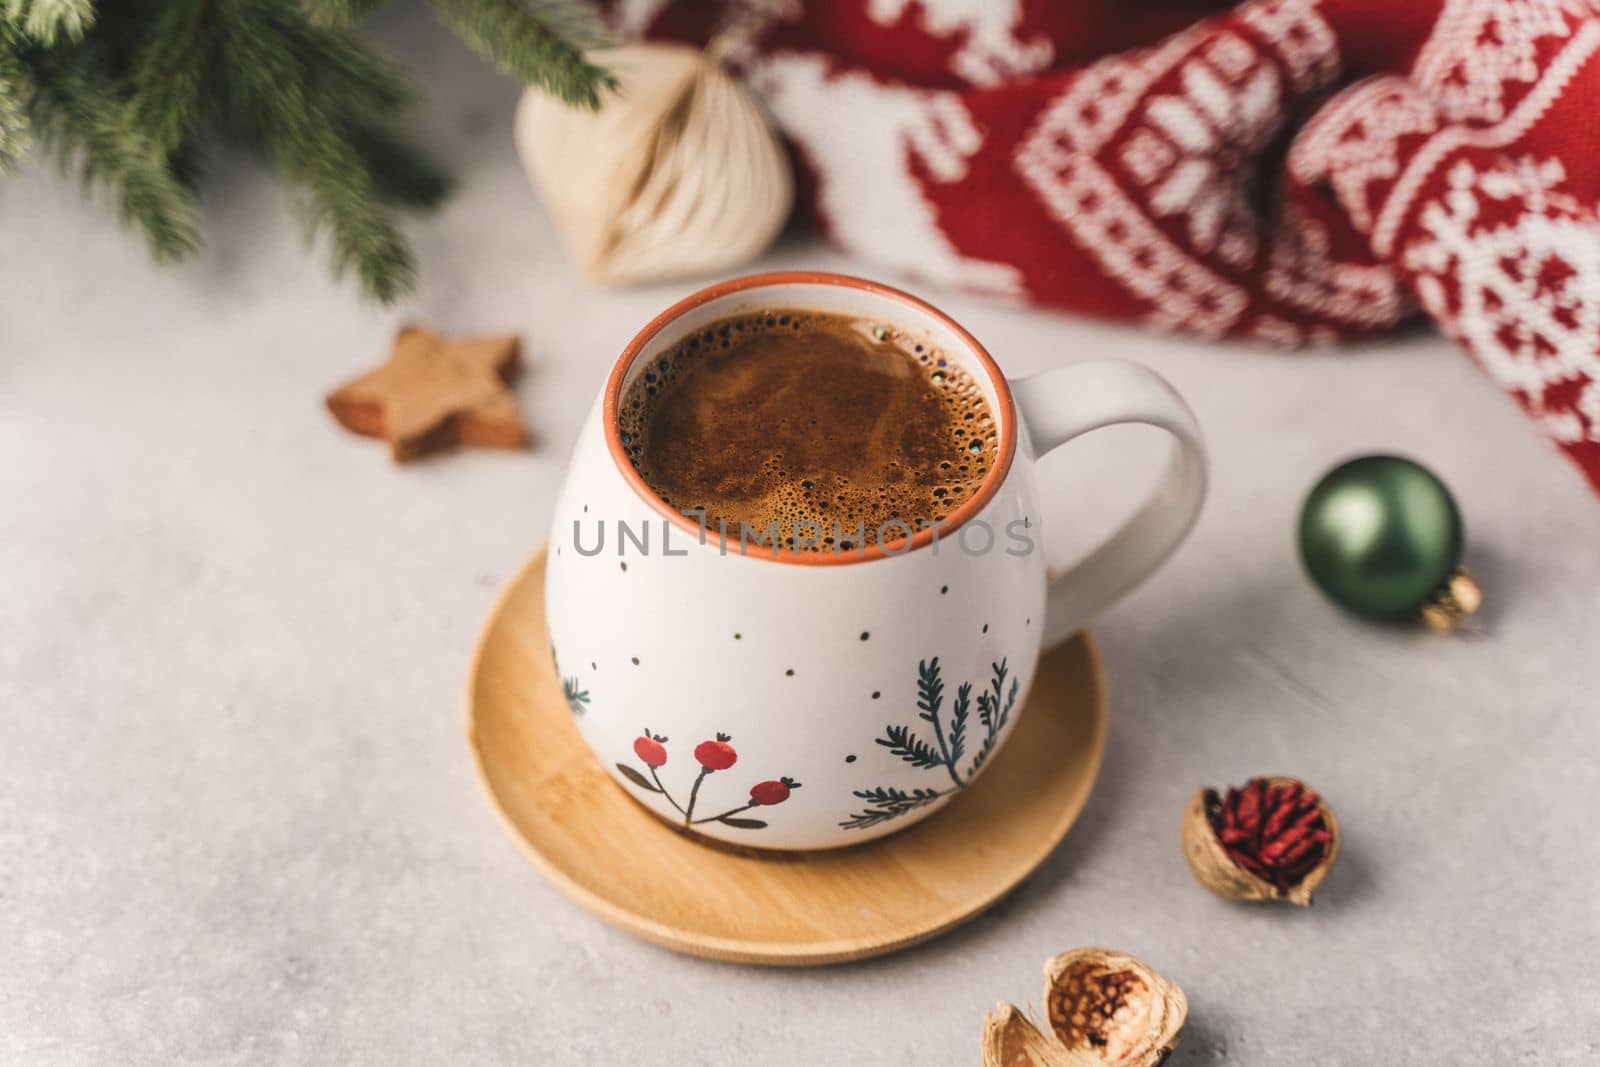 Cup of hot coffee with fir tree, wooden star and warm cozy sweater. Christmas greeting card, lights background. Xmas holiday eco nature decorations. Zero waste concept.